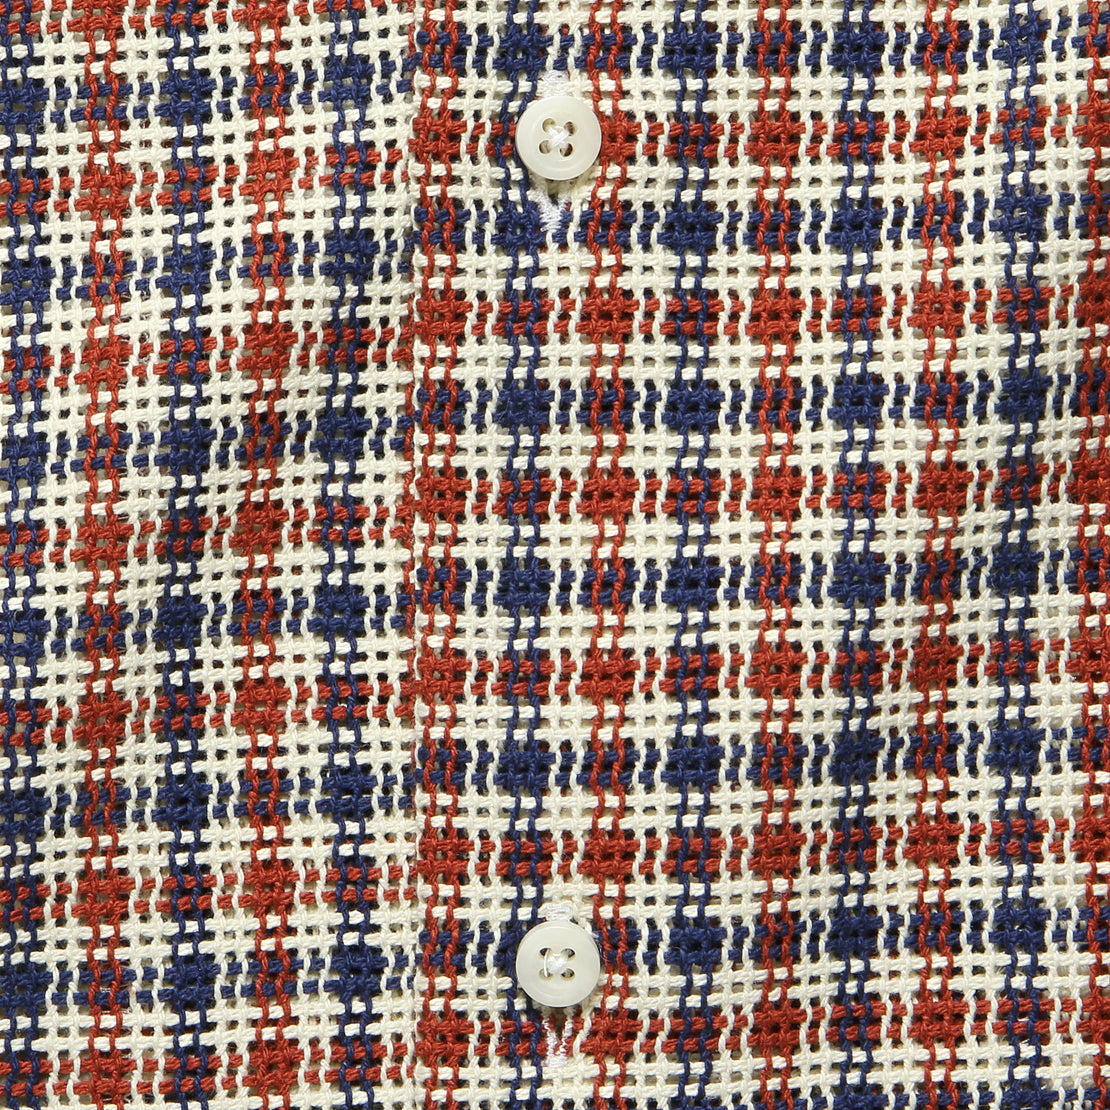 Eco Open Weave Camp Shirt - Red/Navy - Gitman Vintage - STAG Provisions - Tops - S/S Woven - Plaid